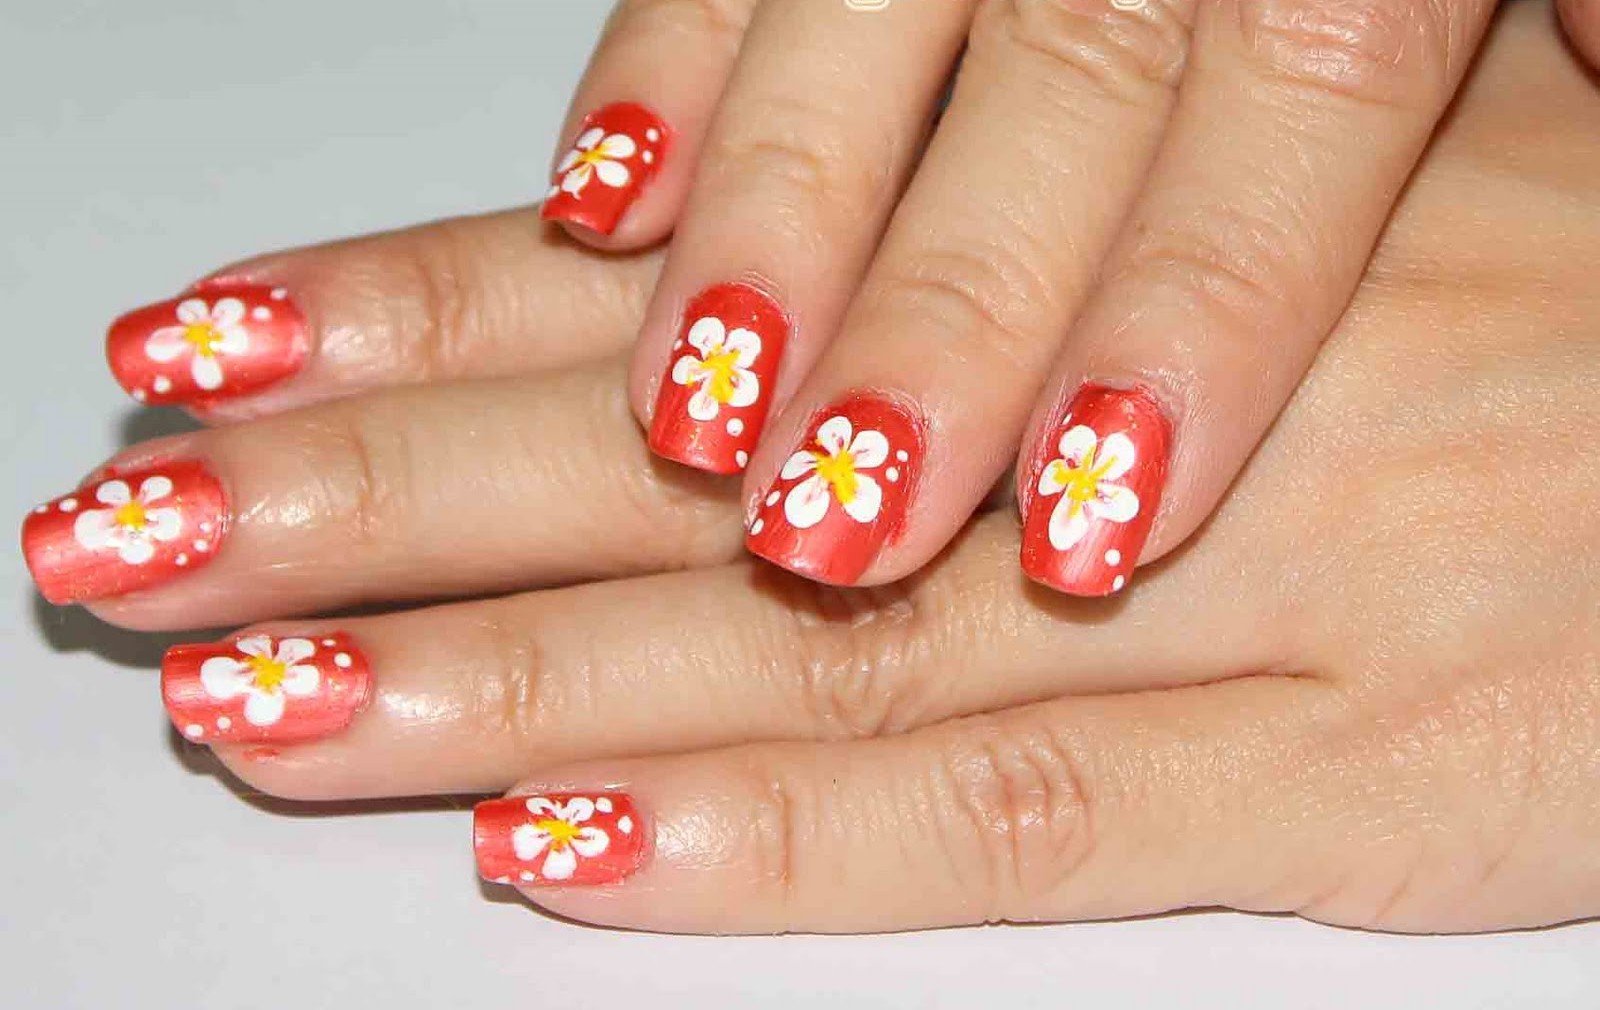 3. Quick and Simple Nail Art Tutorials - wide 8